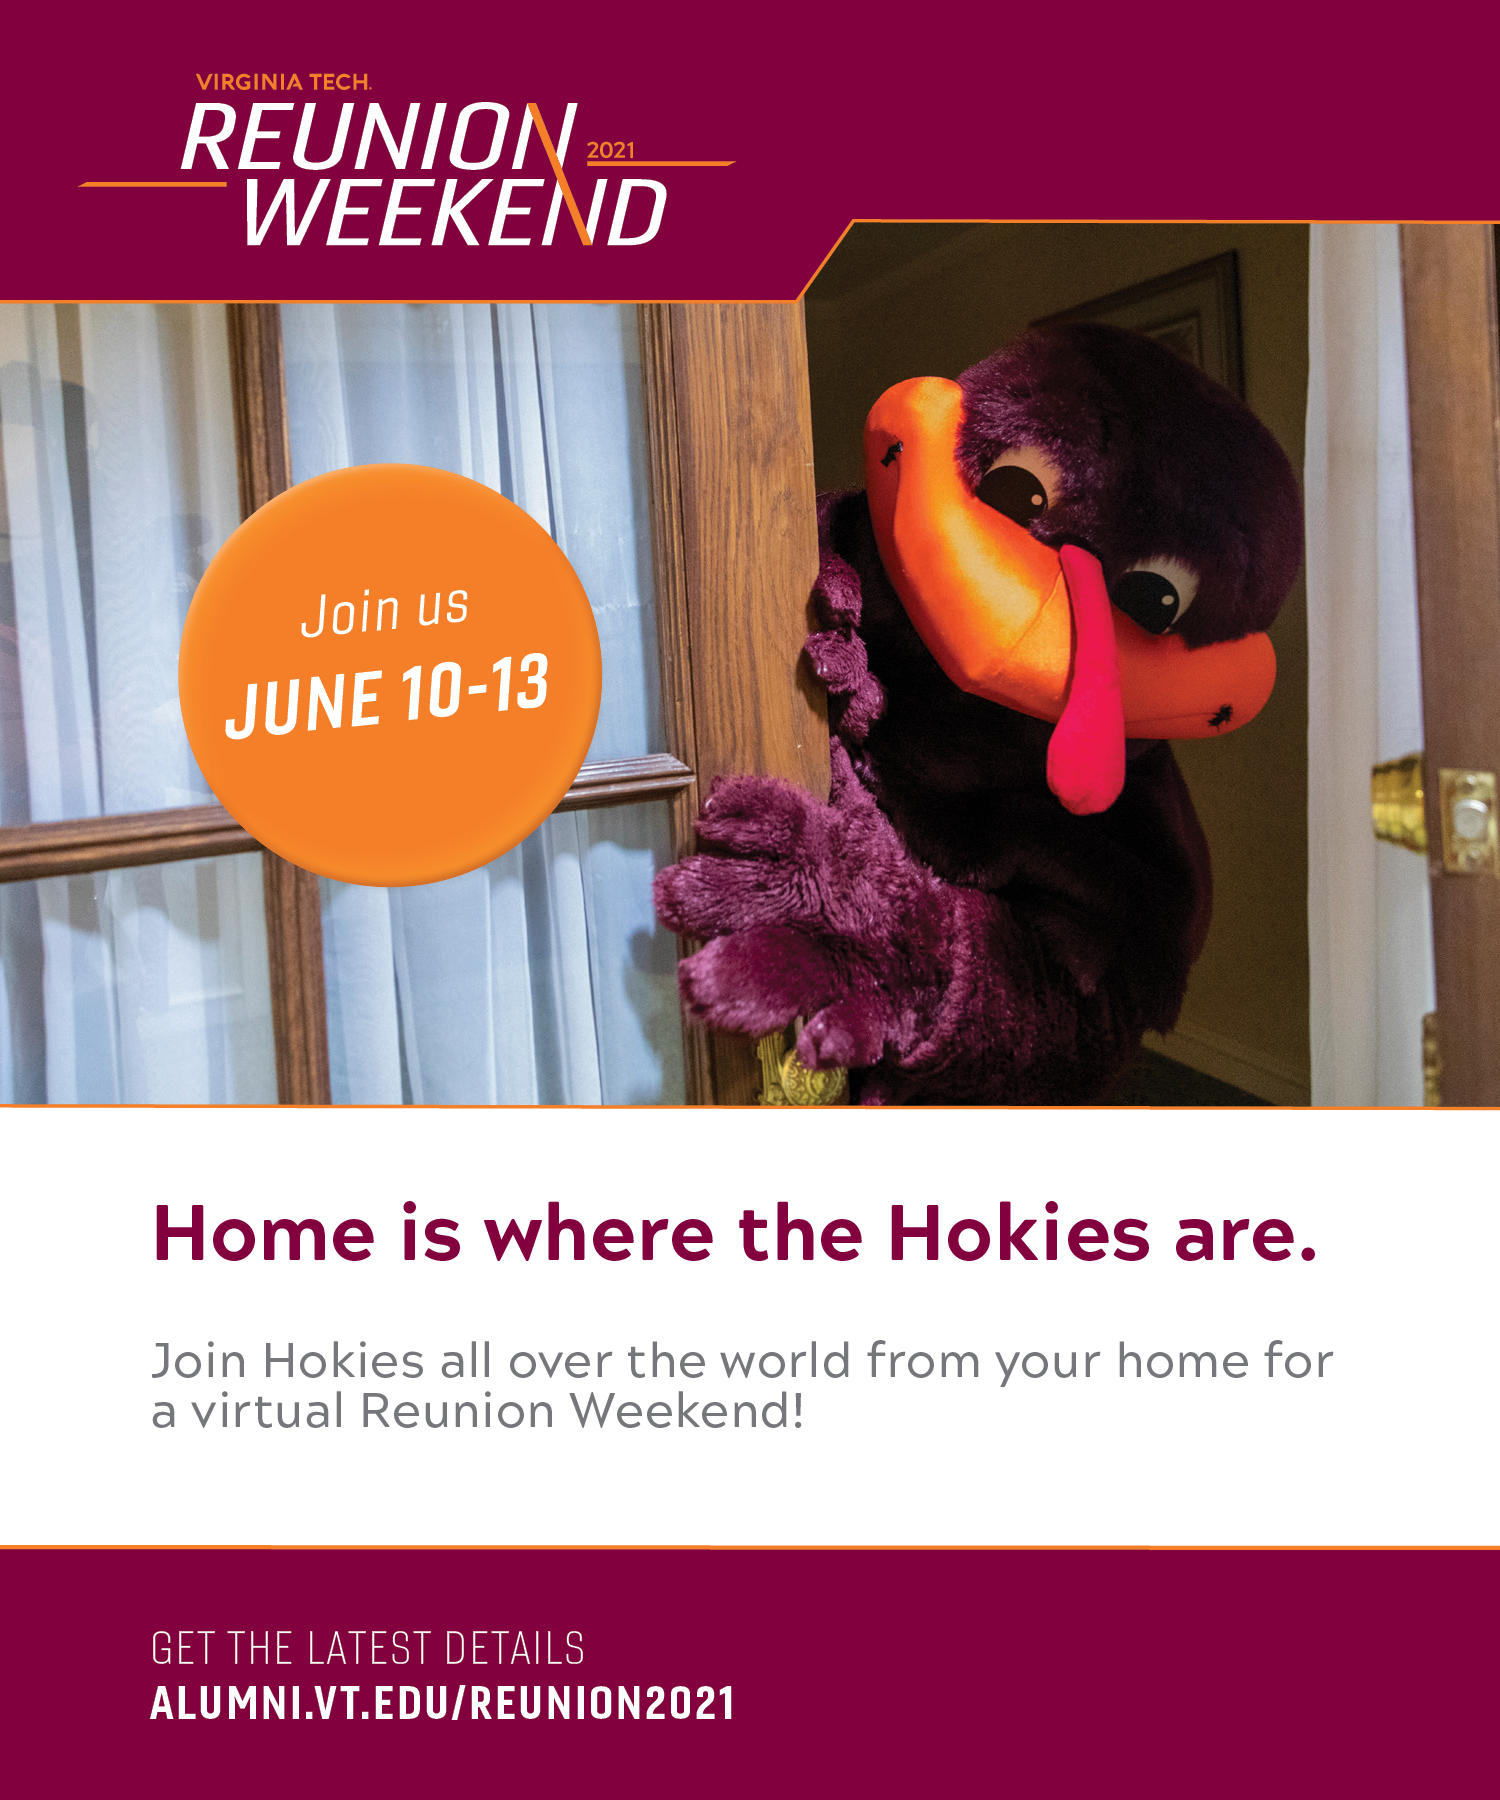 Virginia Tech Reunion Weekend: Join us June 10-13. Home is where the Hokies are. Join Hokies all over the world from your home for a virtual Reunion Weekend! Get the latest details: alumni.vt.edu/reunion2021